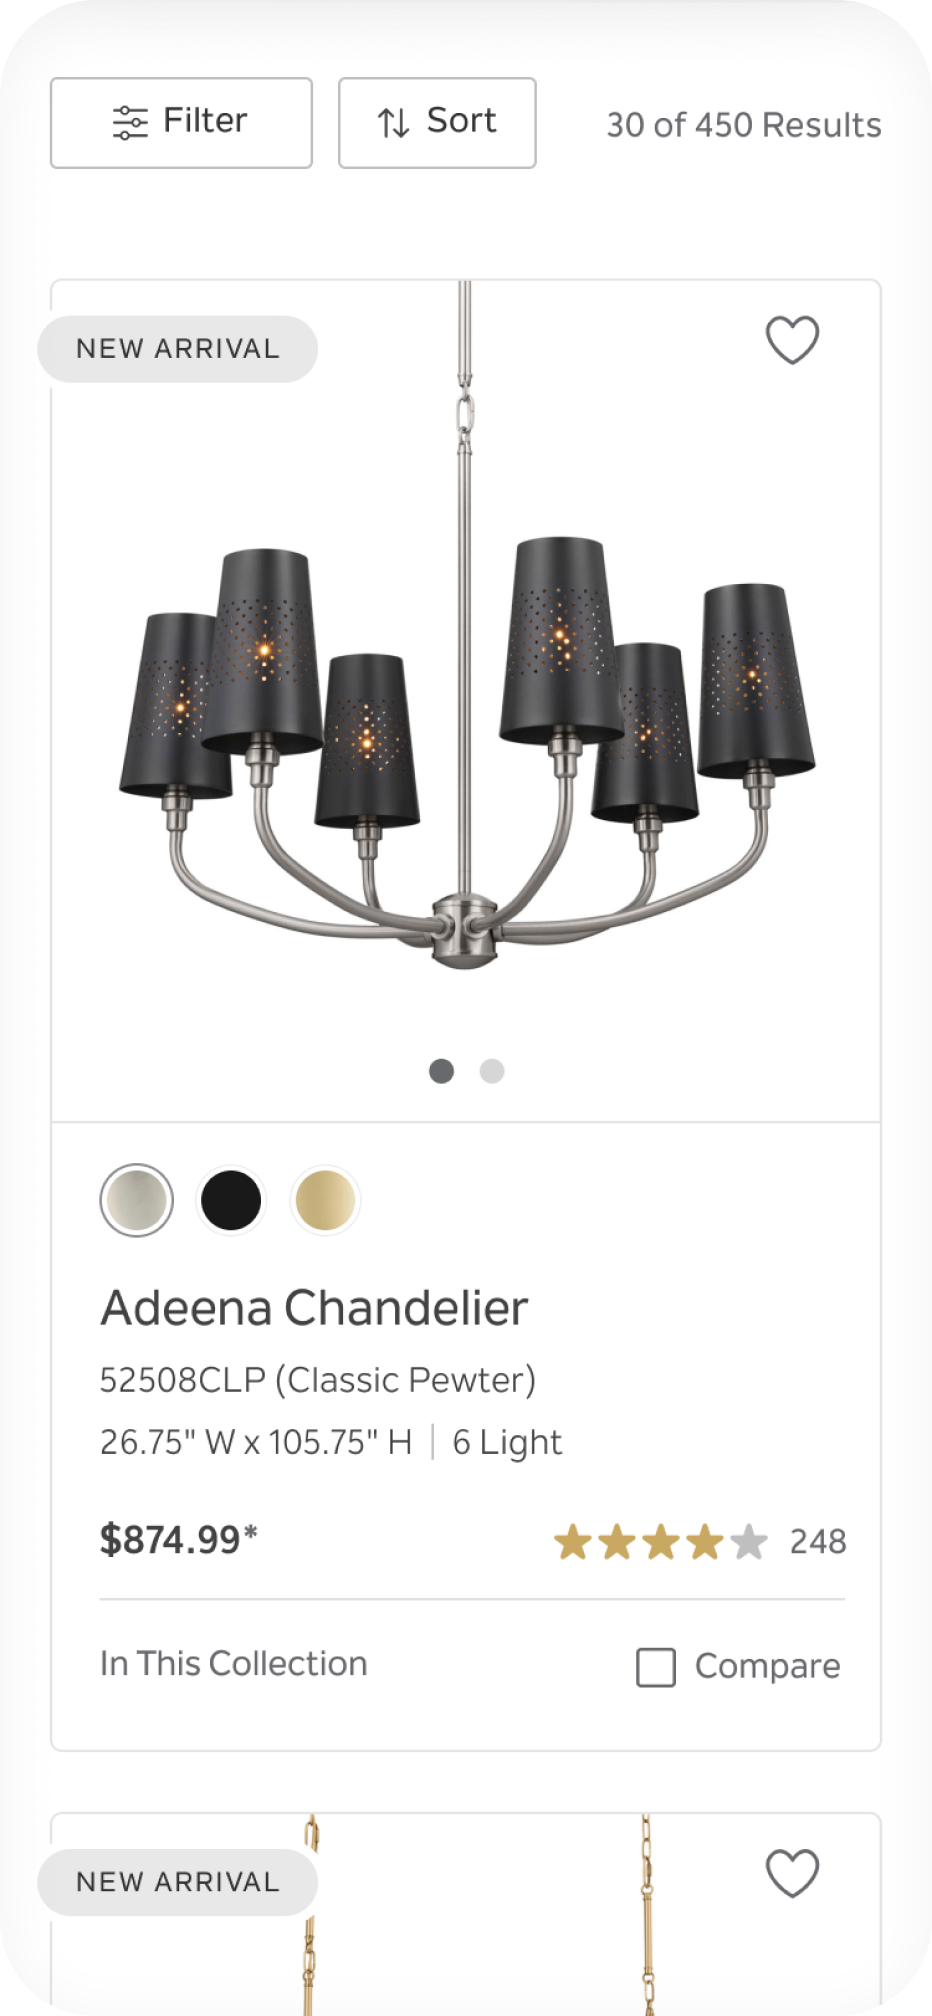 Listing for an Adeena Chandelier